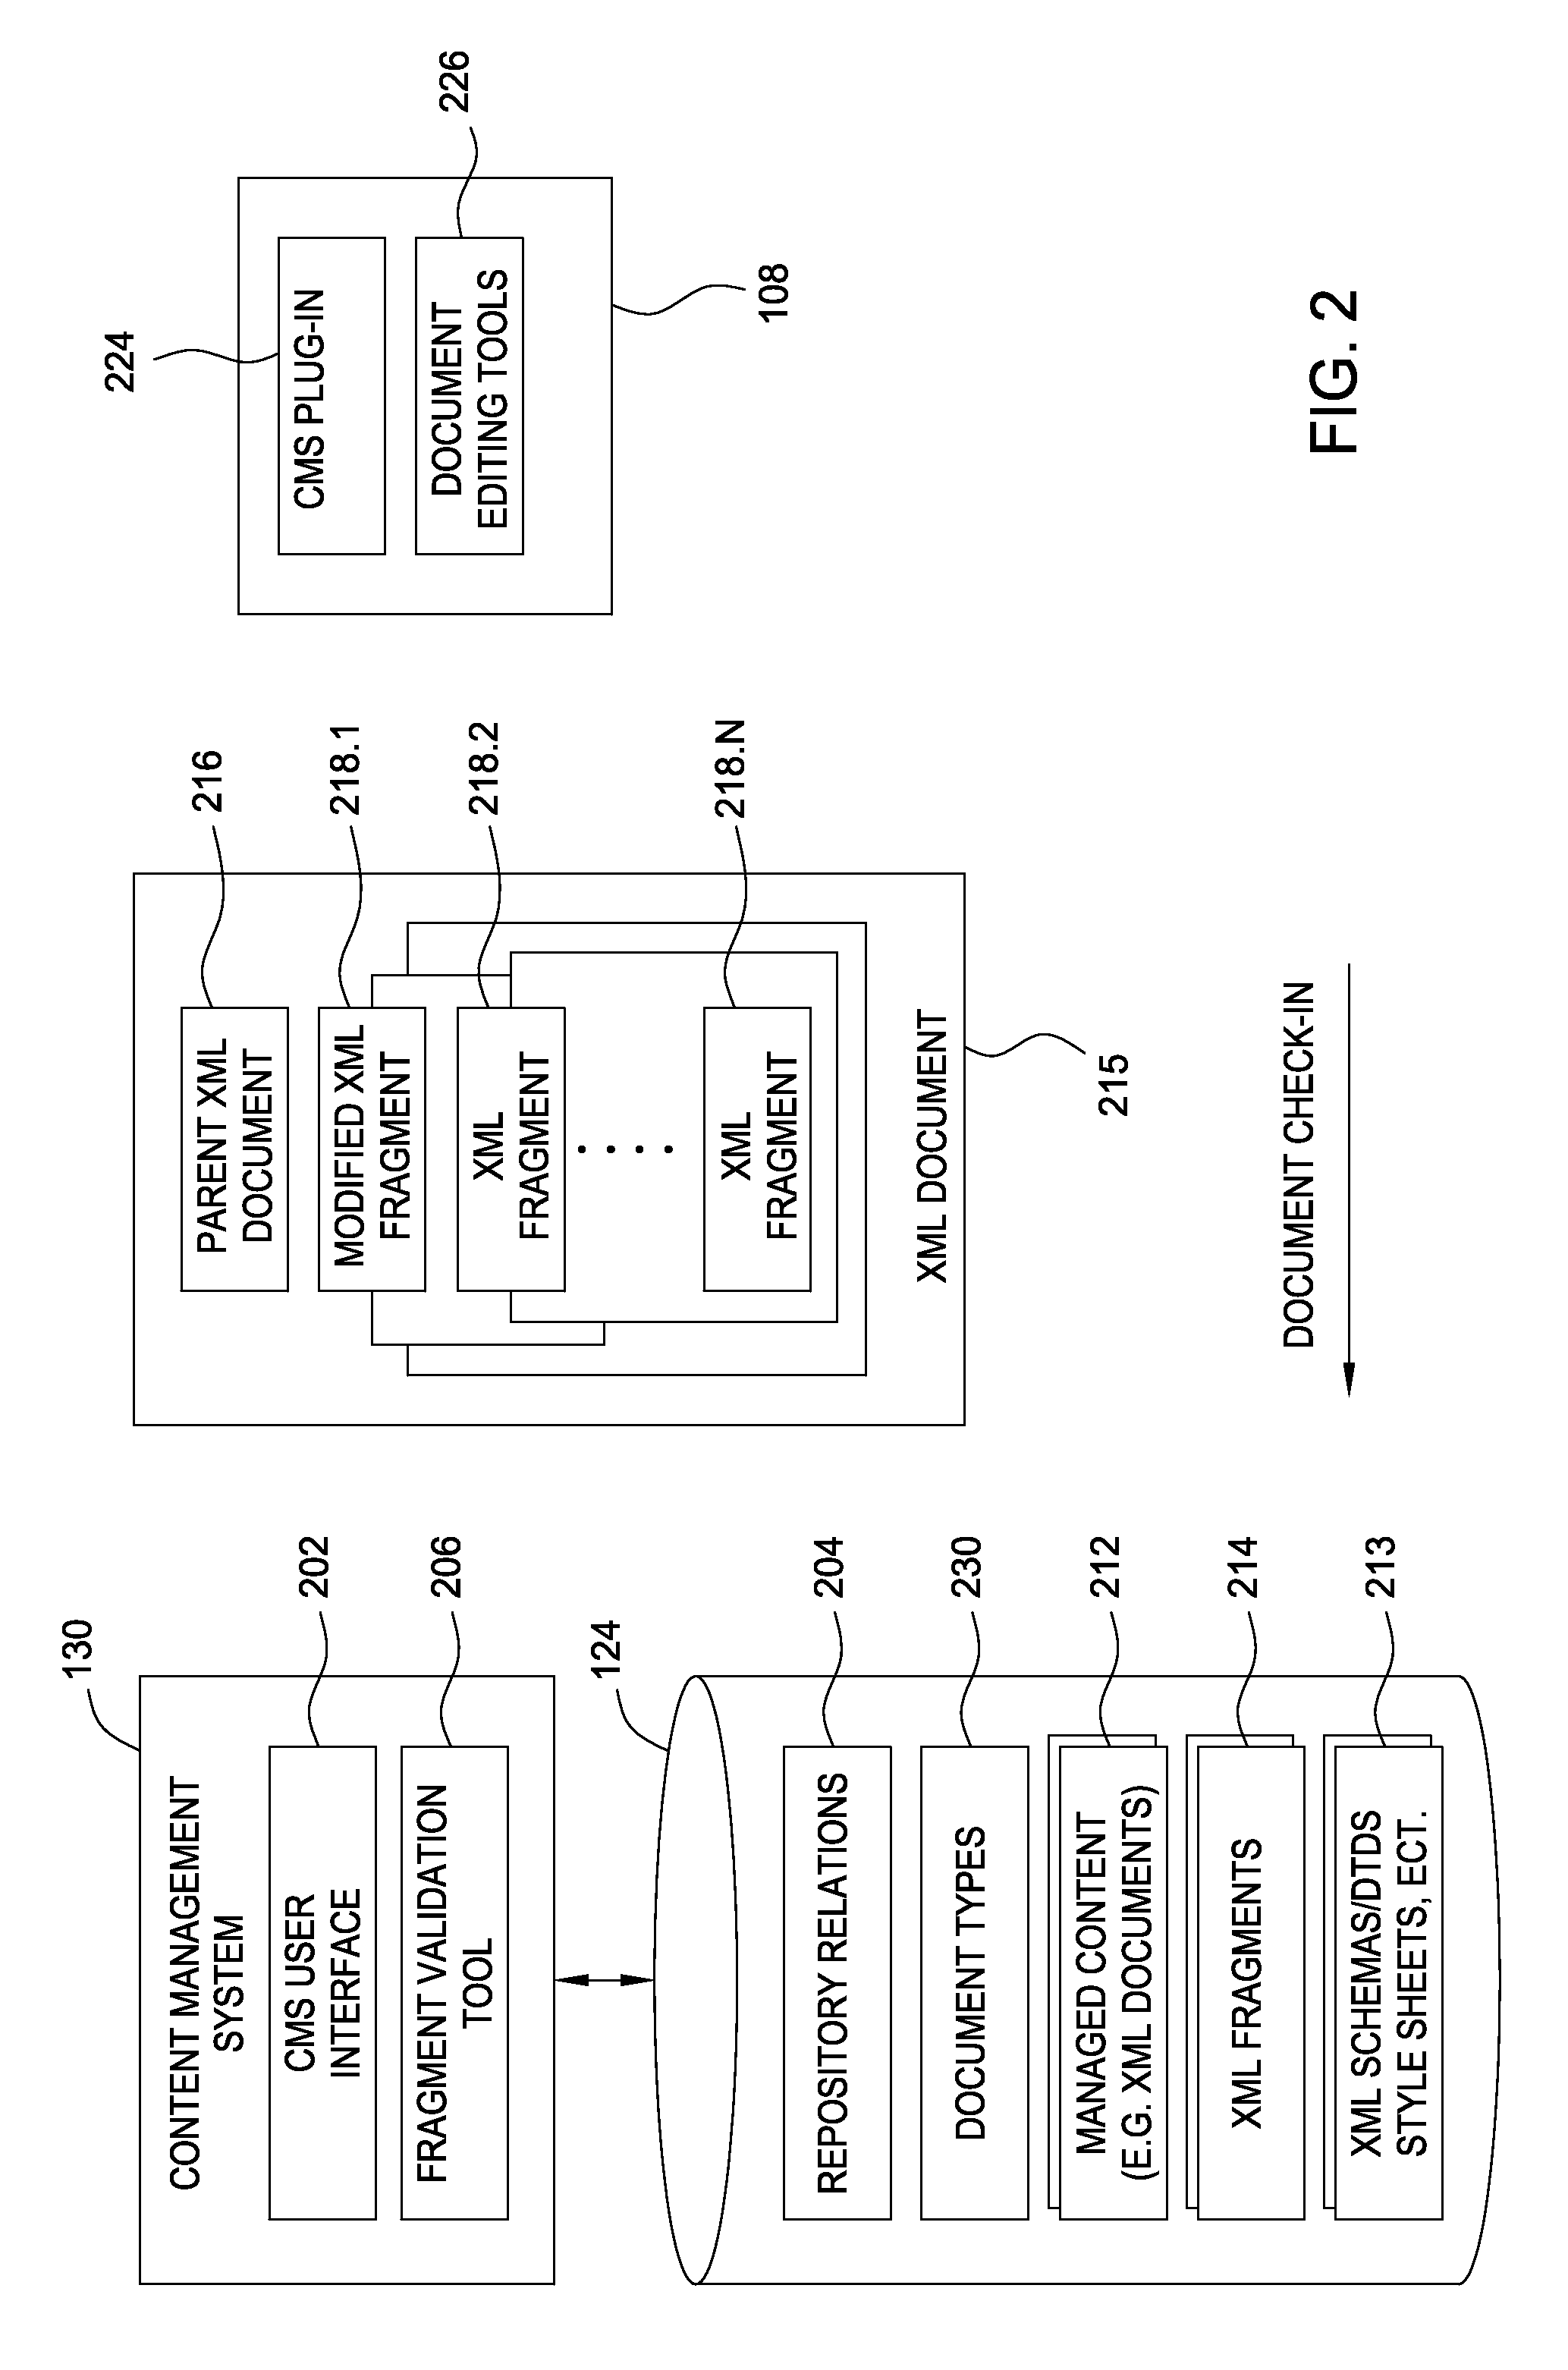 Method for multicontext XML fragment reuse and validation in a content management system